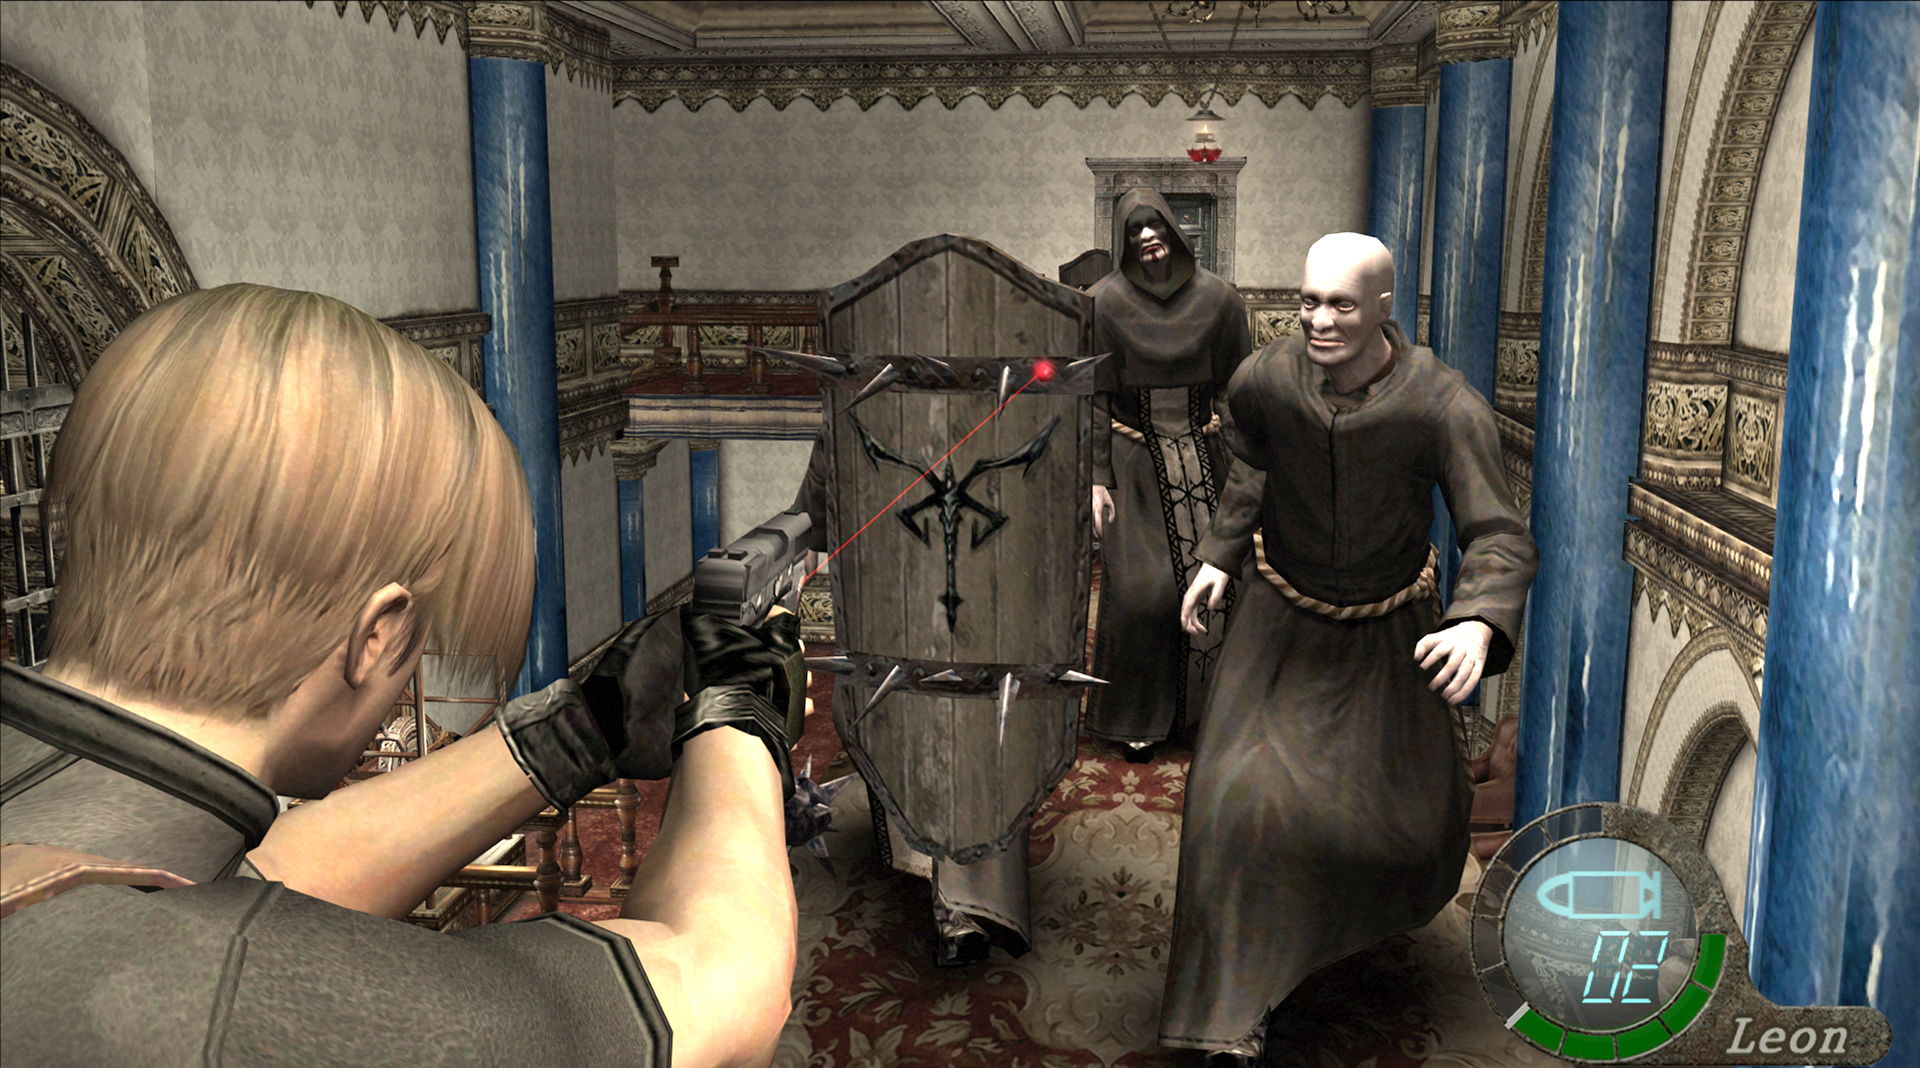 ihobo: Game Inventories (4): Resident Evil 4 and X-Com